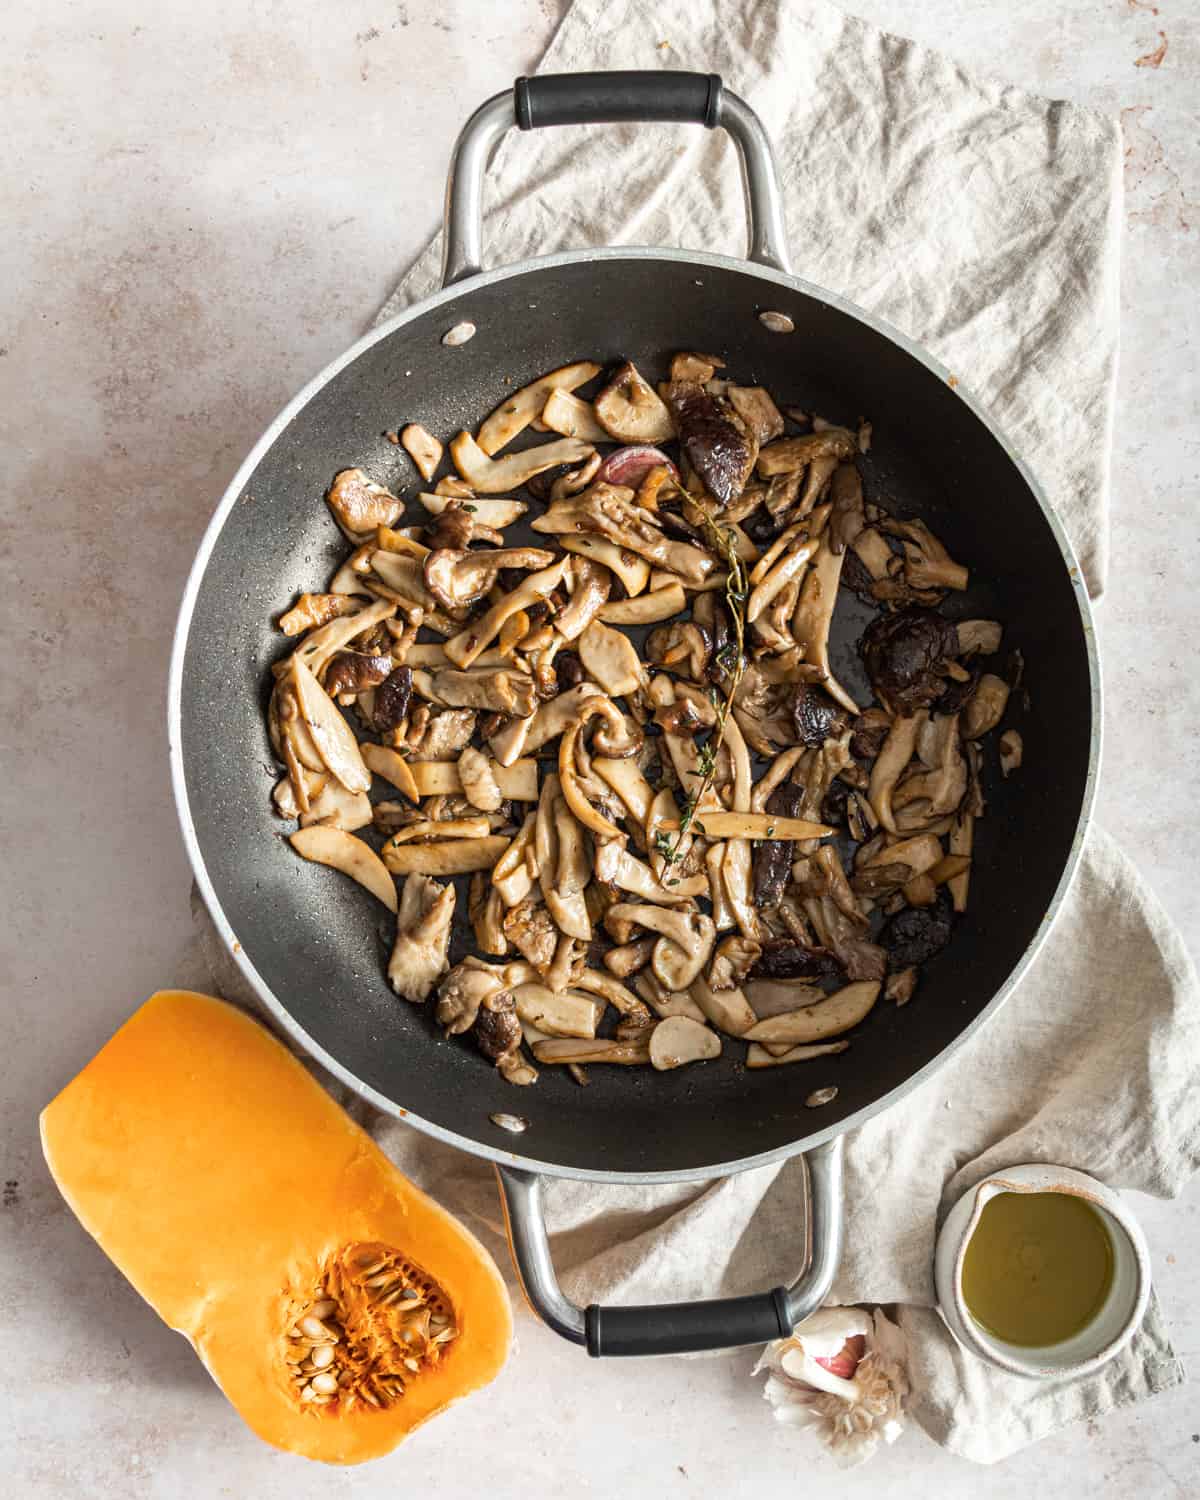 pan fried mushrooms with thyme on a cloth 